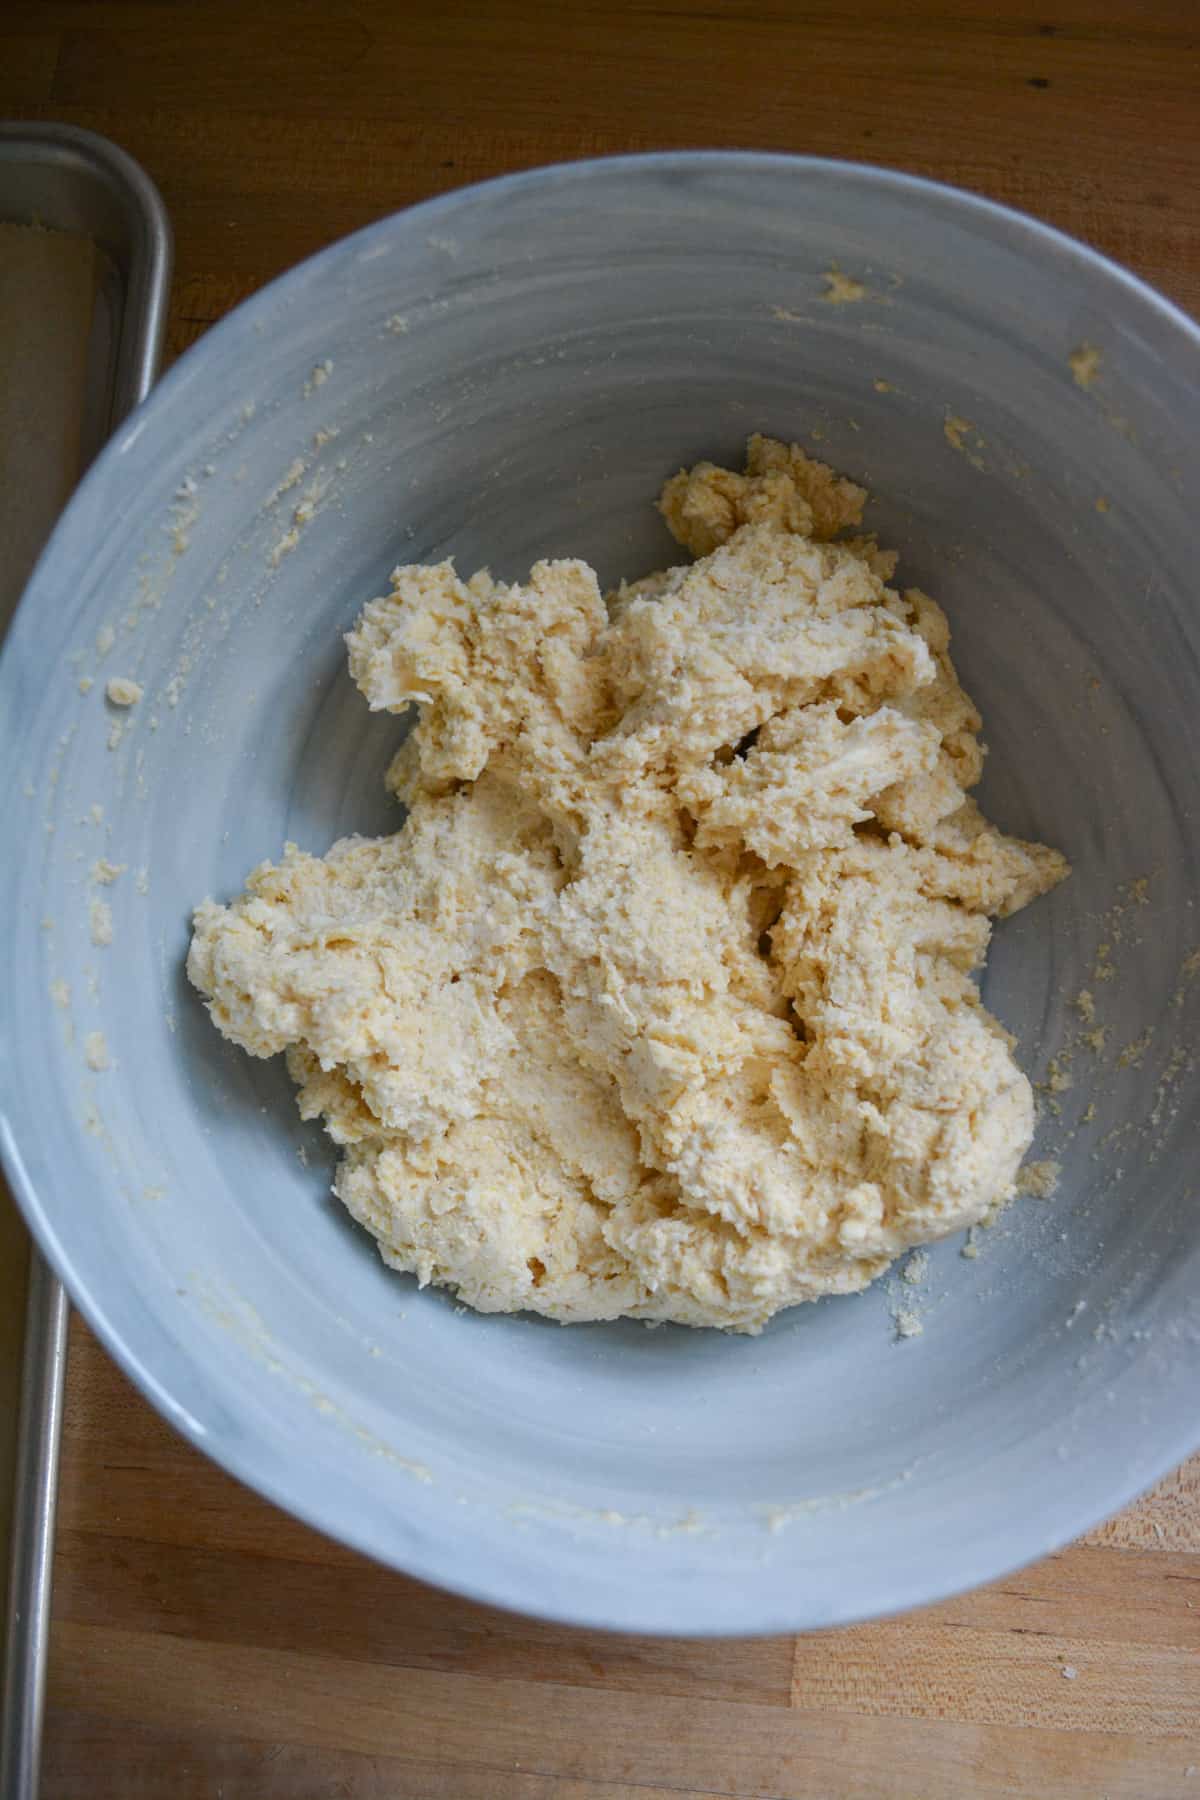 Finished Vegan fluffy cornmeal drop biscuit dough.